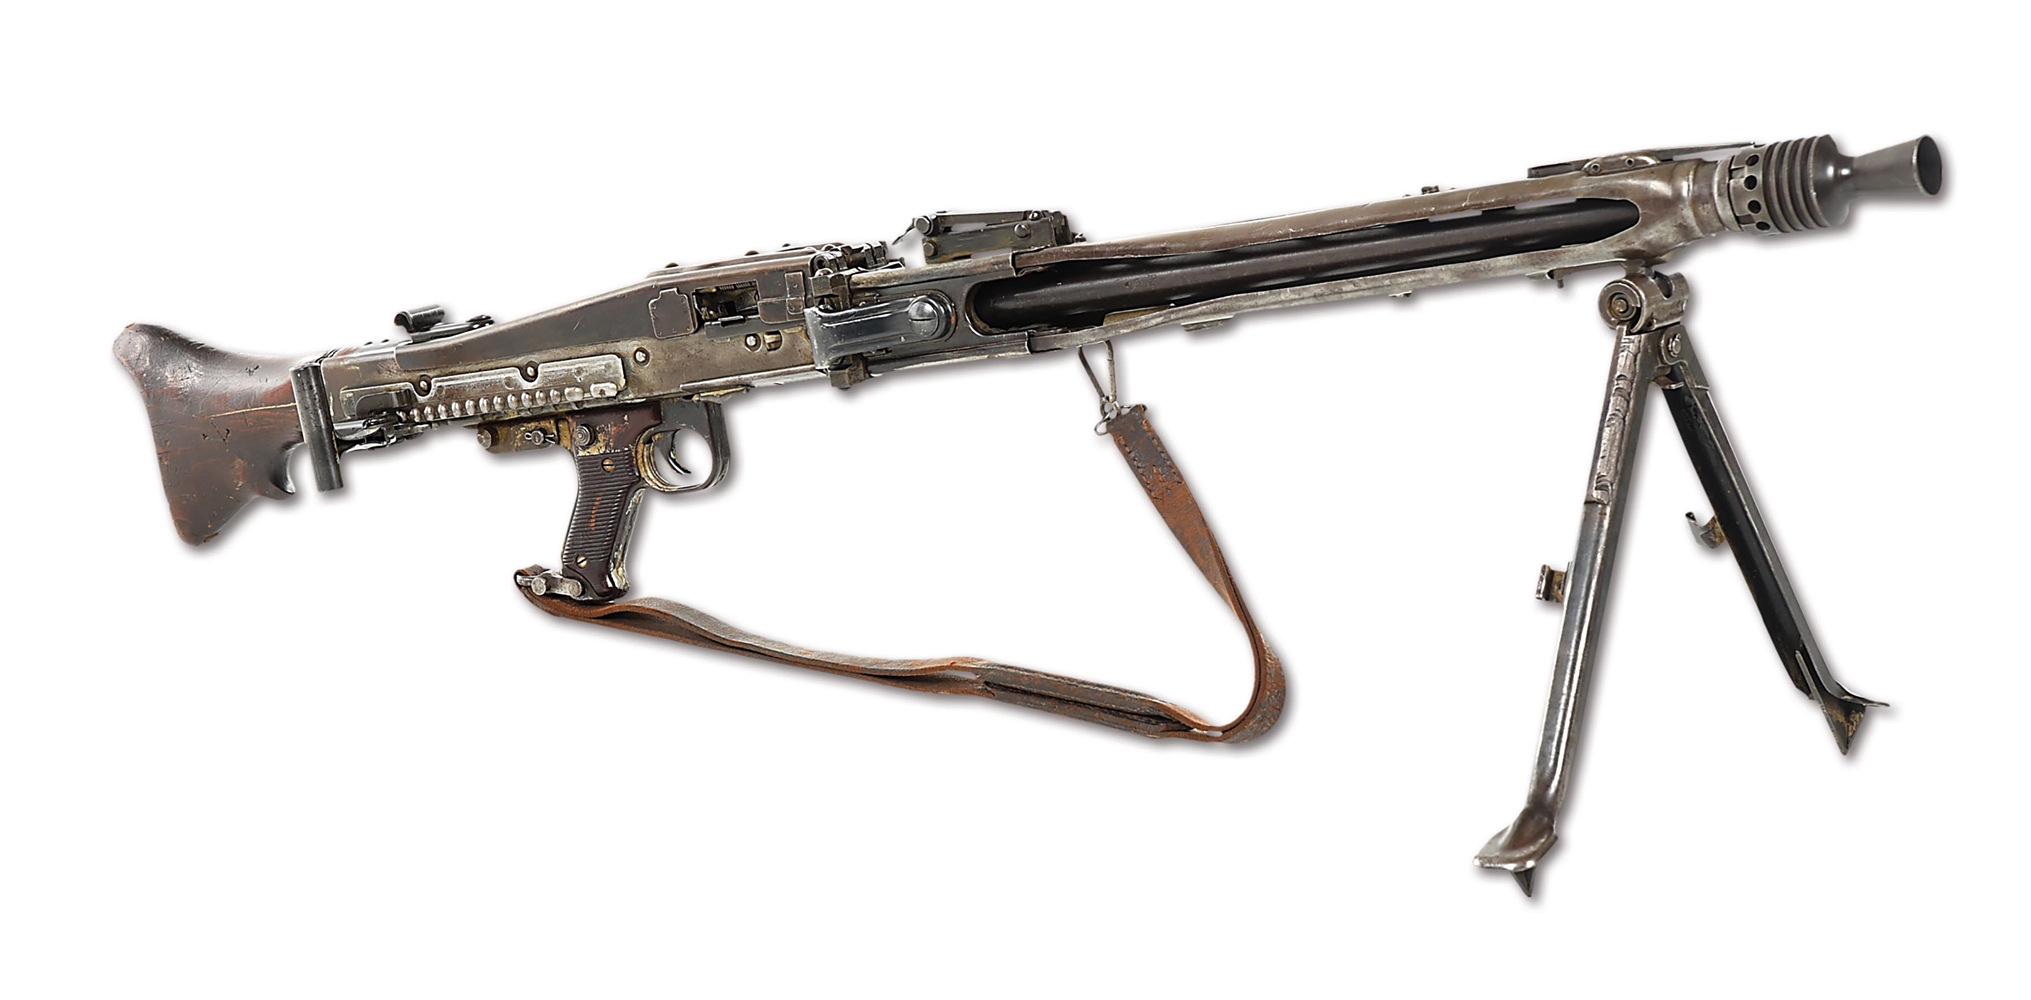 (N) VETERAN ALL ORIGINAL GERMAN WWII MG-42 MACHINE GUN WITH REMNANTS OF ORIGINAL WHITE PAINT CAMOUFLAGE (CURIO & RELIC).